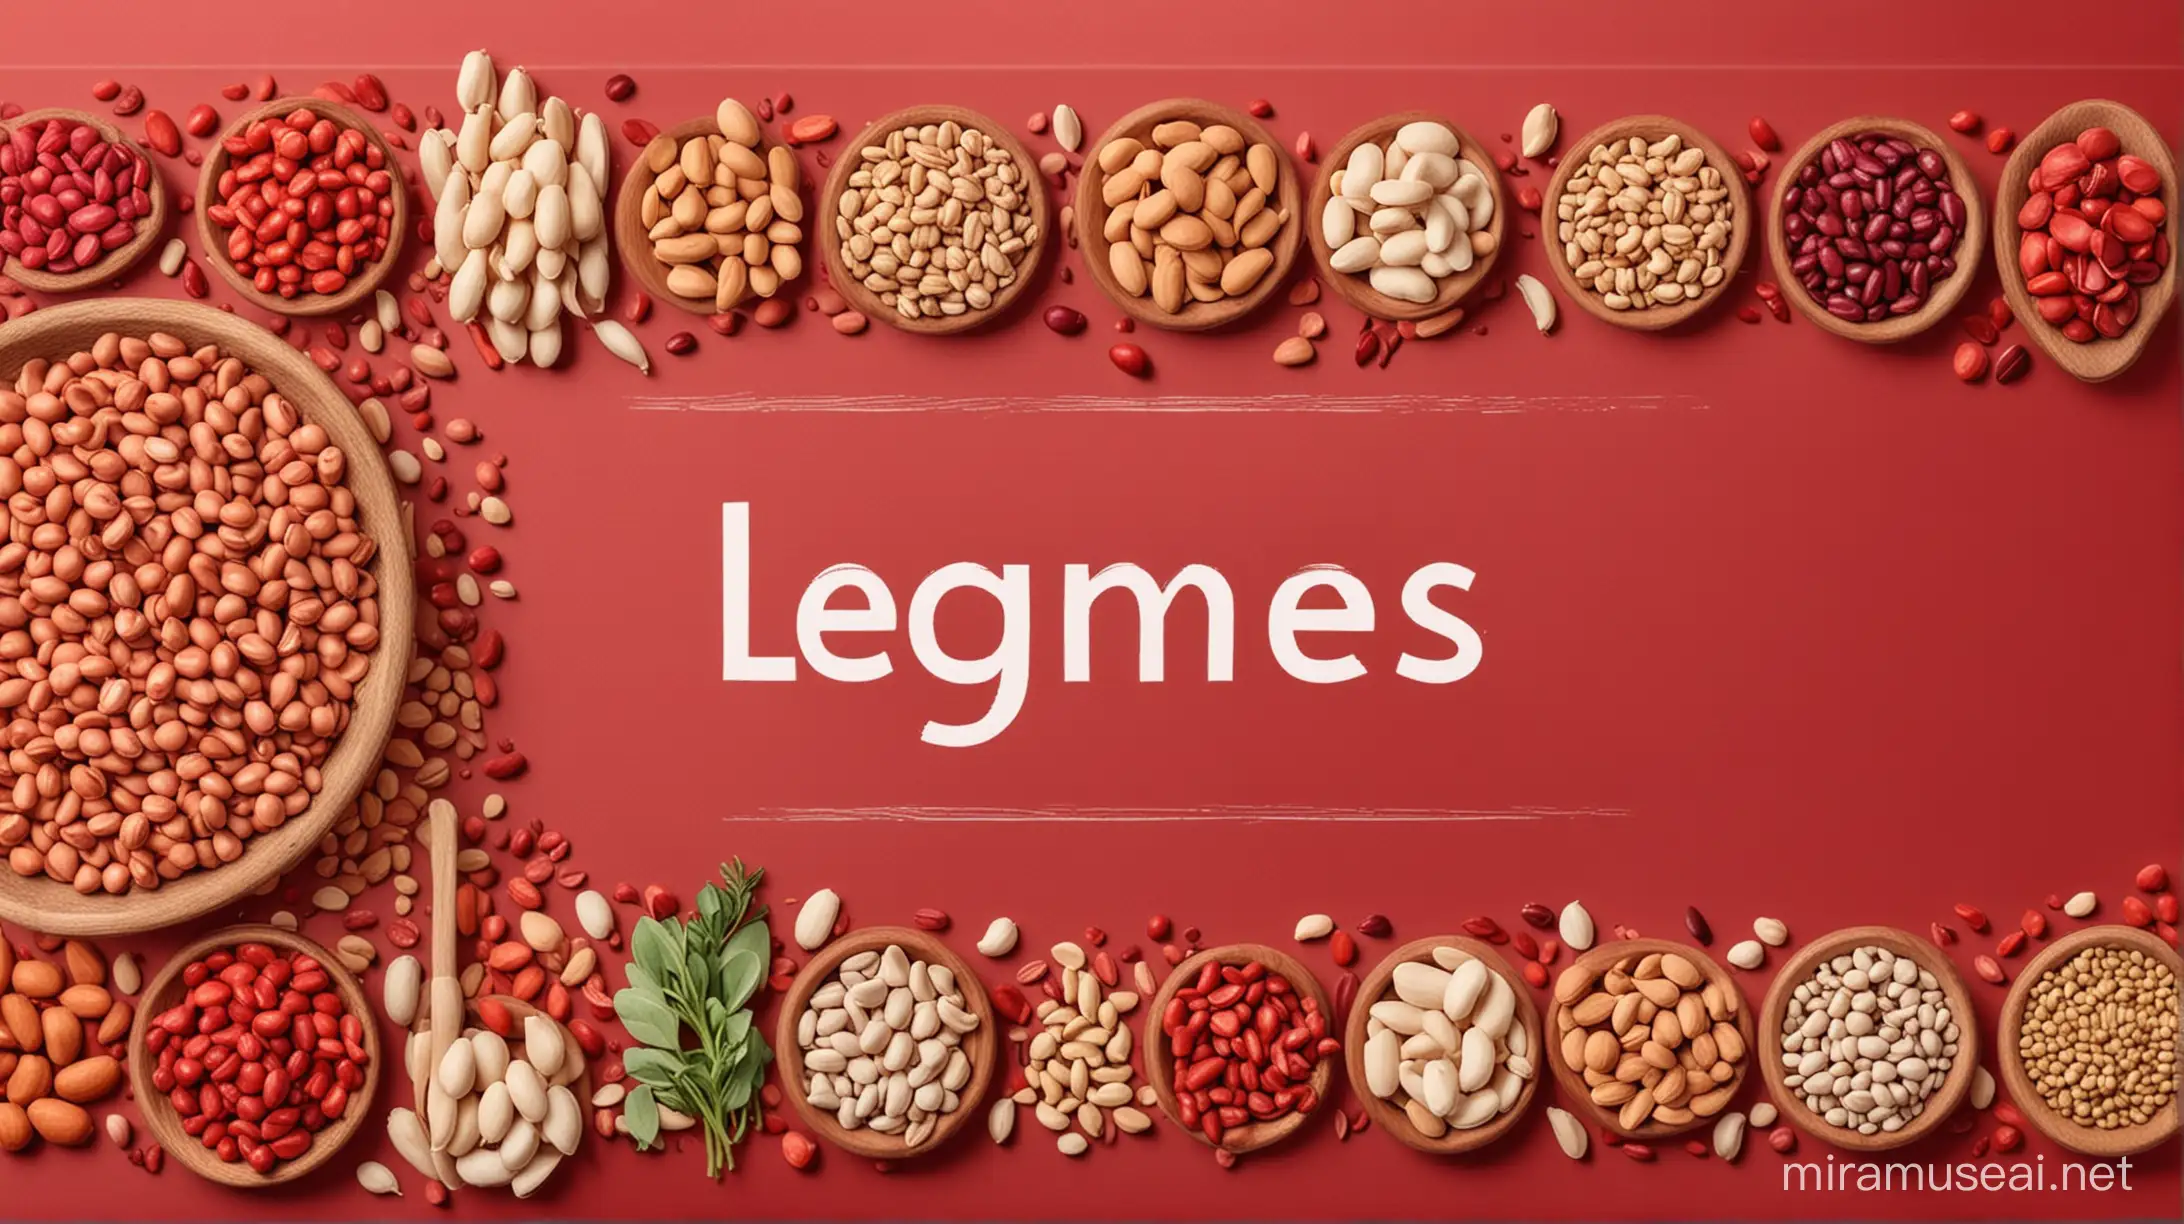 Vibrant Banner Design Featuring Red Legumes in a Rich Color Palette